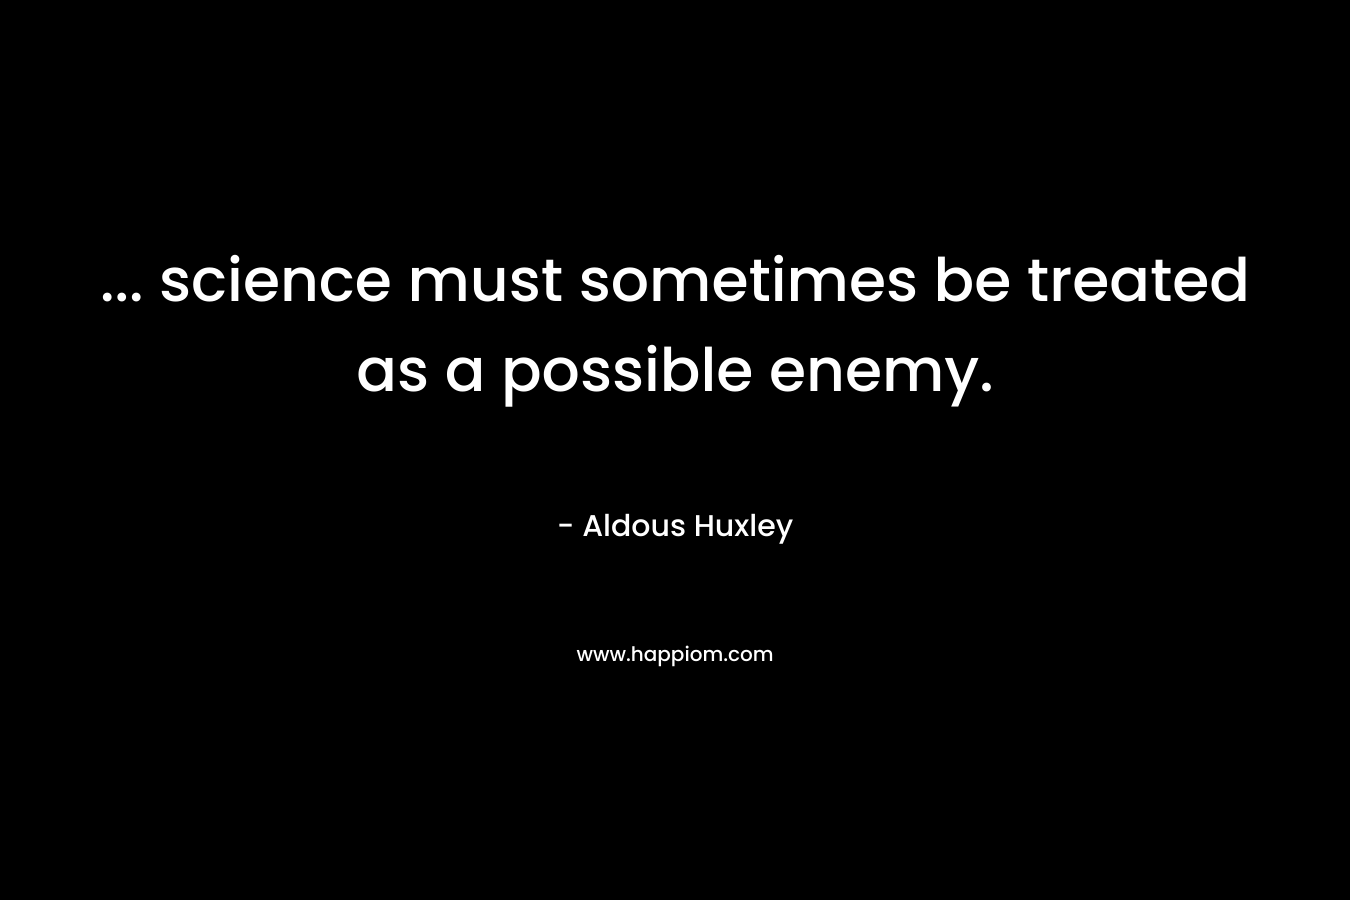 ... science must sometimes be treated as a possible enemy.